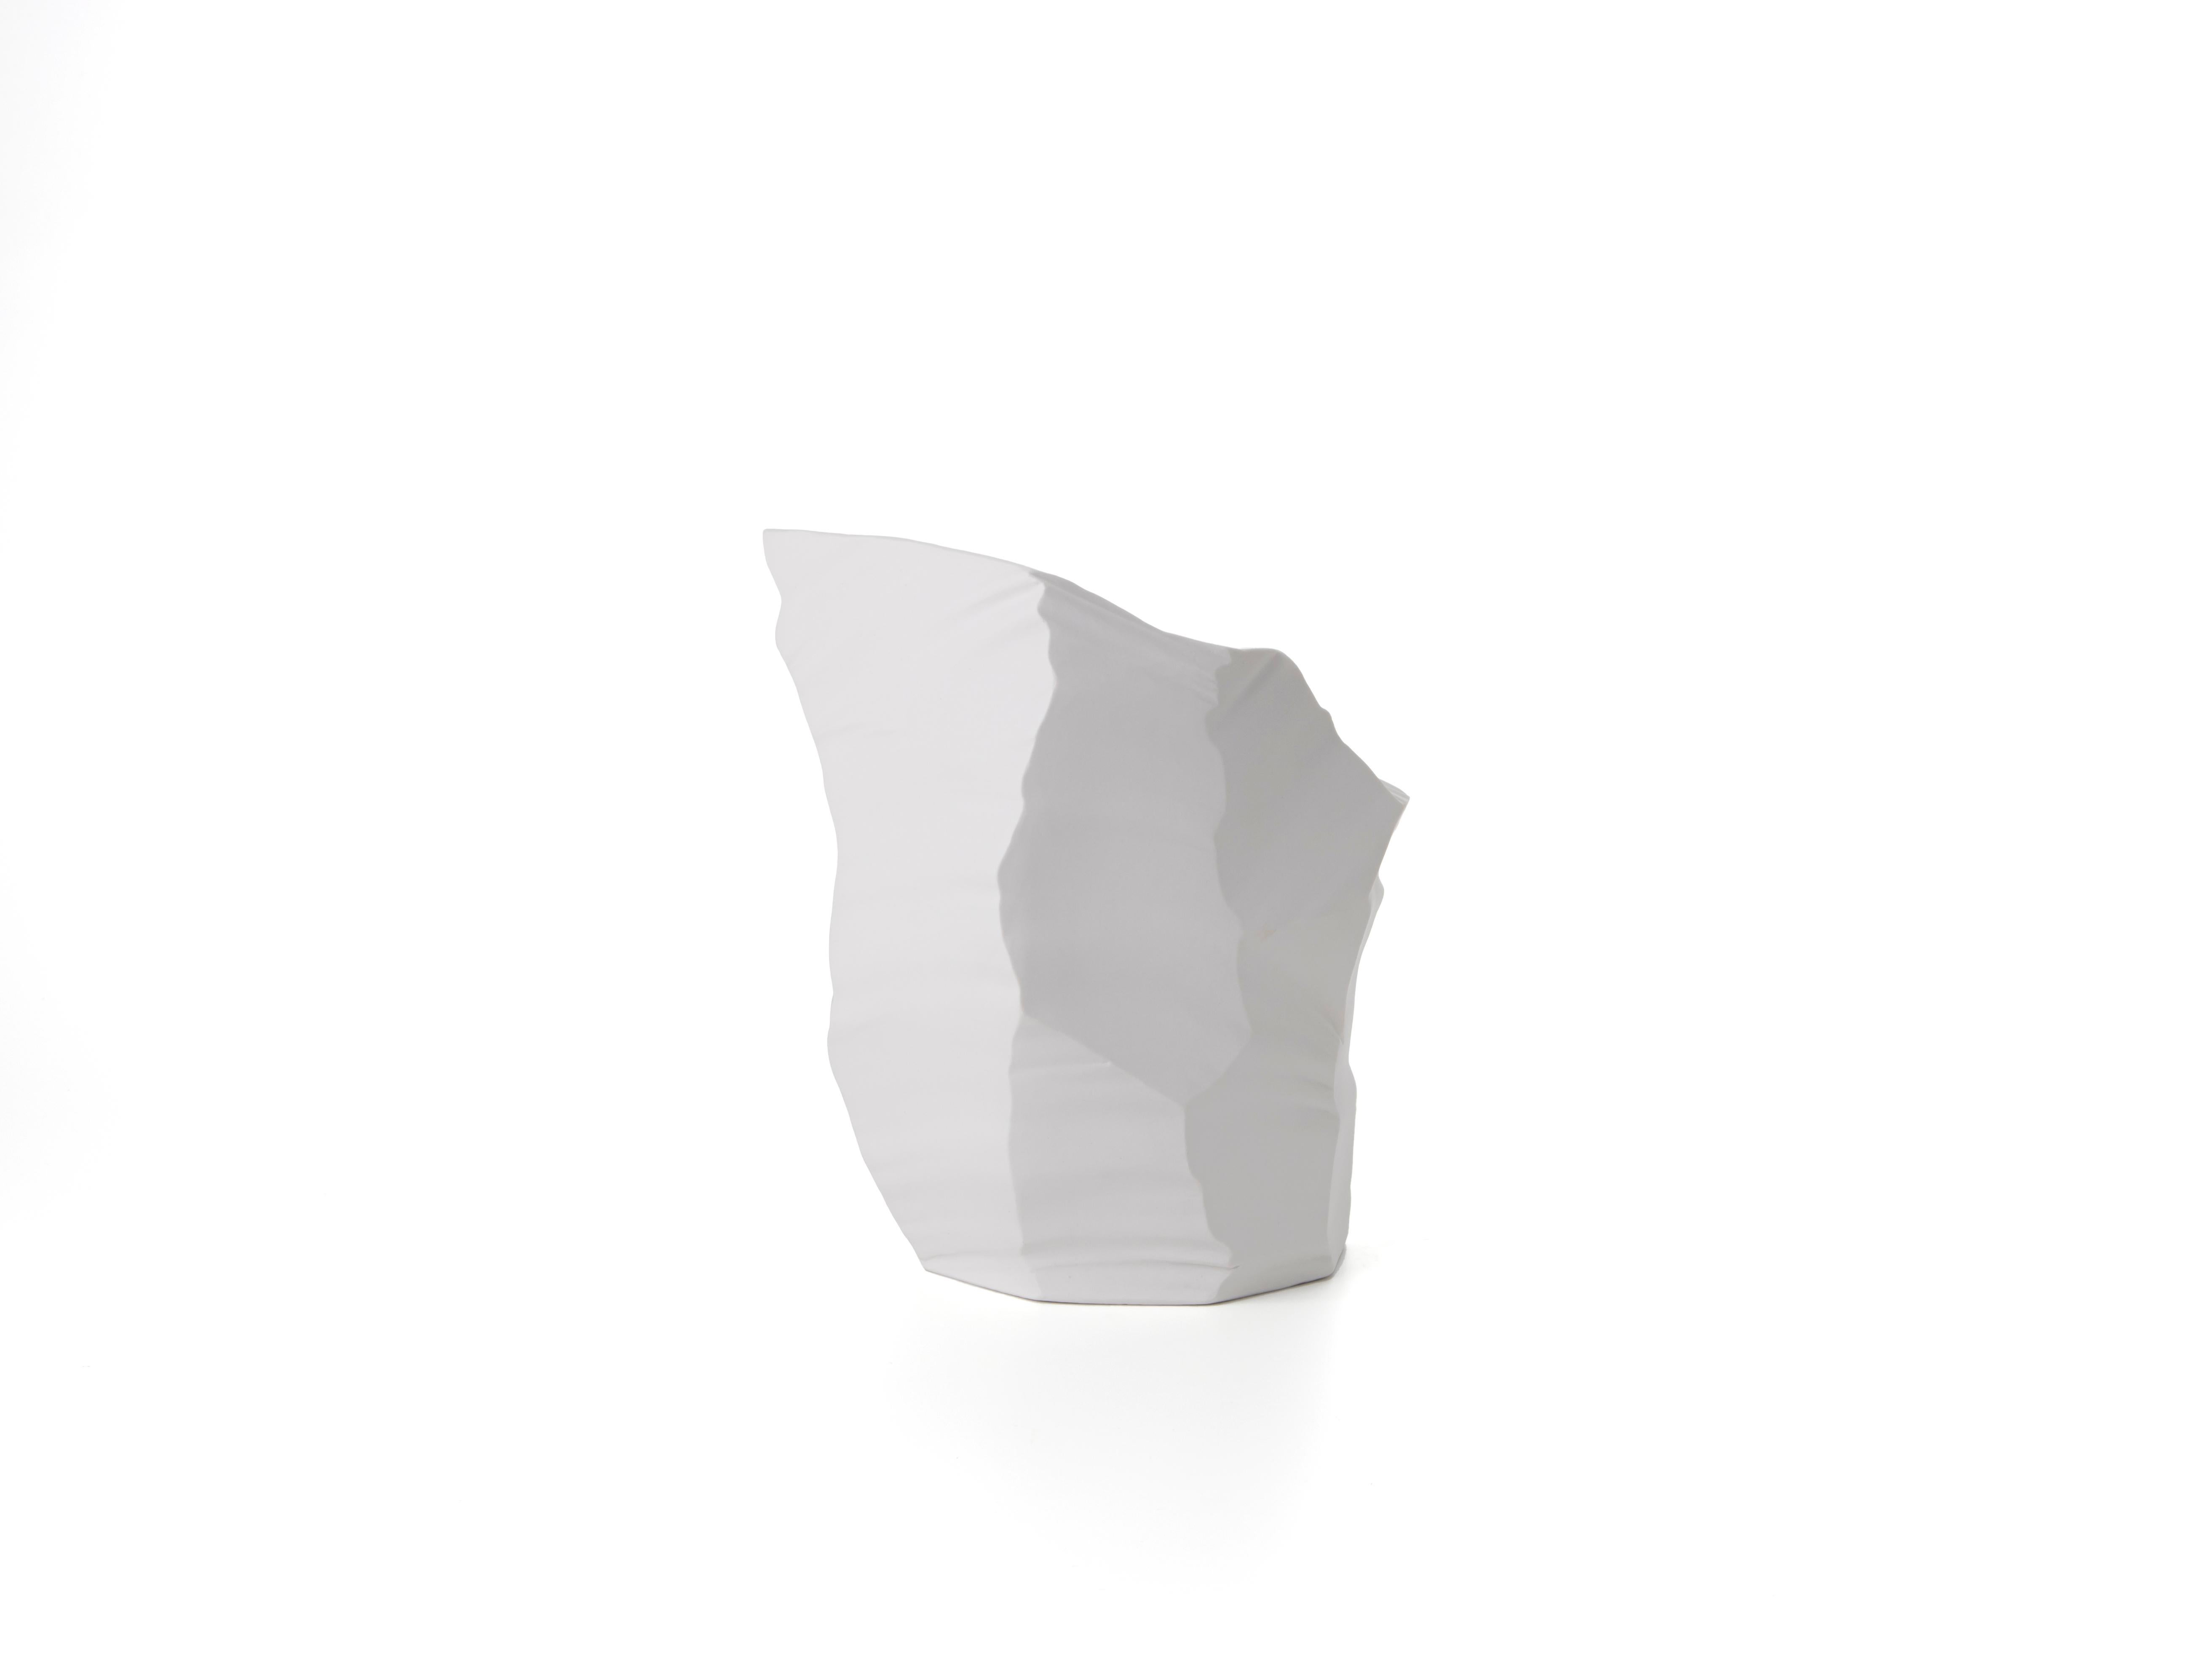 Porcelain vase / sculpture with a bold personality, part of ARTIKA collection, designed by the architect and designer Giovanni Luca Ferreri. Pure white, the signature style of FOS, changes shade every time light hits the glacier-like facets. The